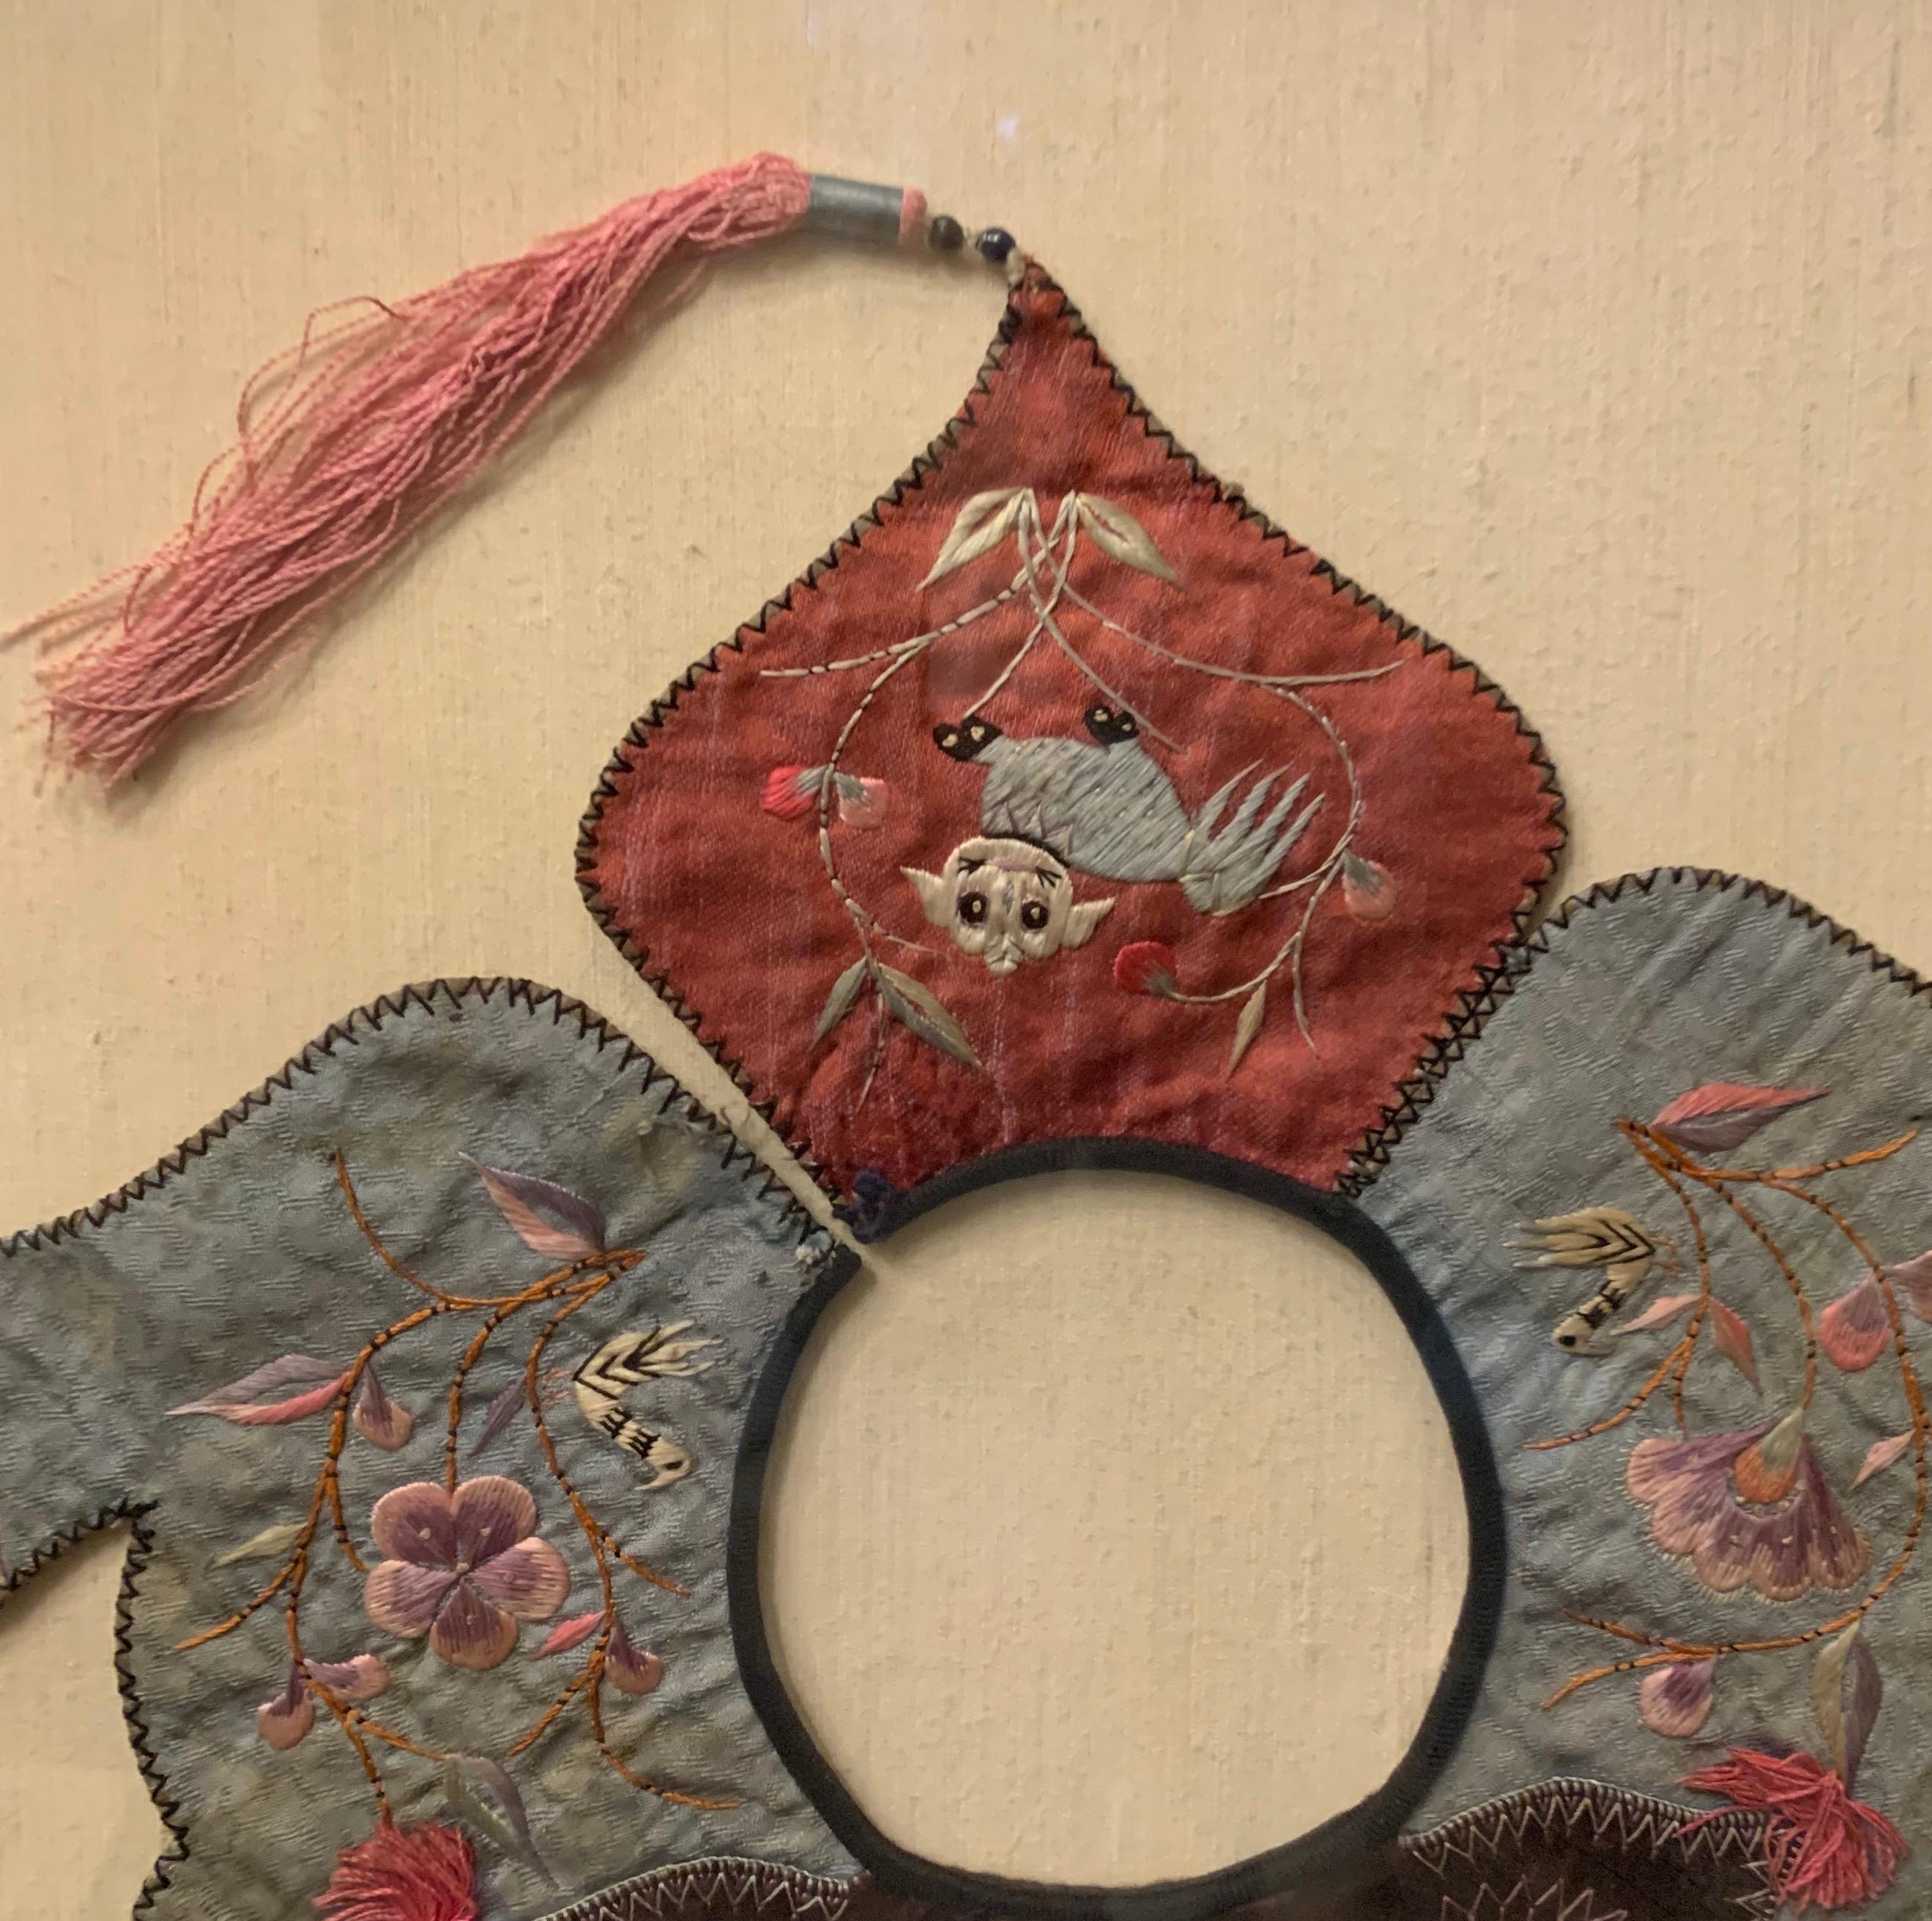 Embroidered Antique Chinese Embroidery Brocade Collar Qing Dynasty Cat Asian Arts Framed For Sale